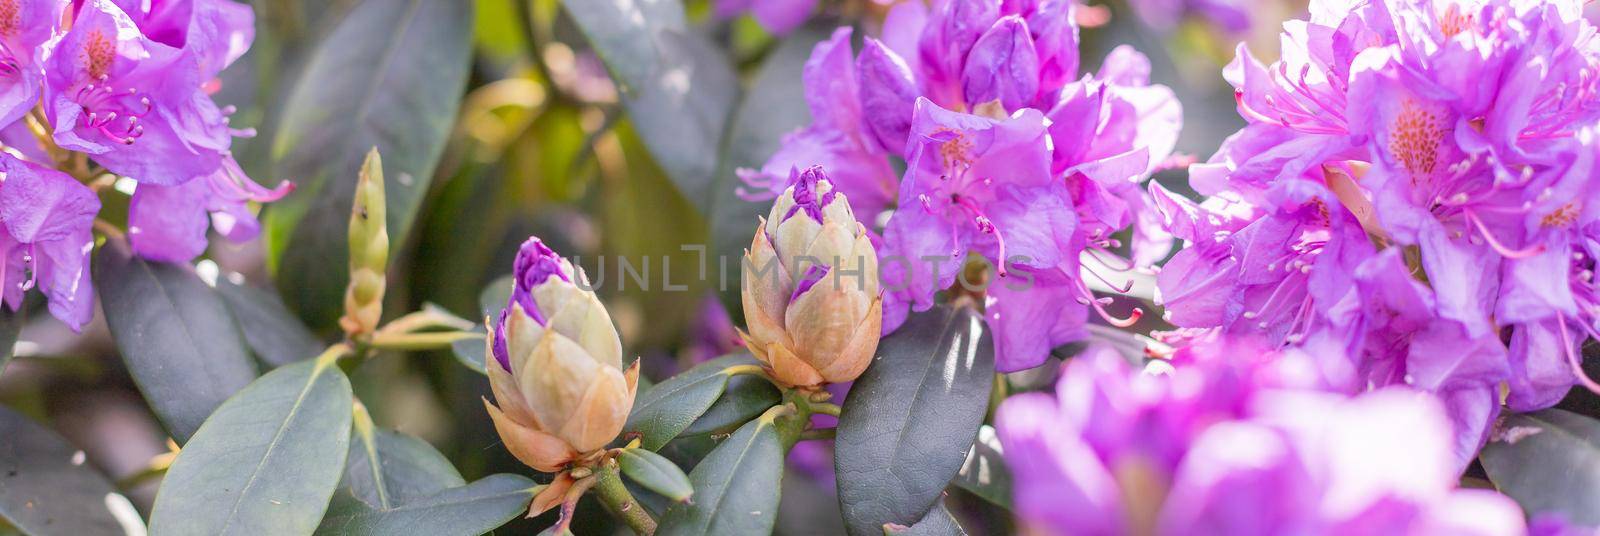 Pink rhododendron flower. Natural beauty. Aroma fragrance. Blossoming bush. Rhododendron pink flower blooming.Azalea blooming pink and purple spring flowers. Gardening, web banner by YuliaYaspe1979